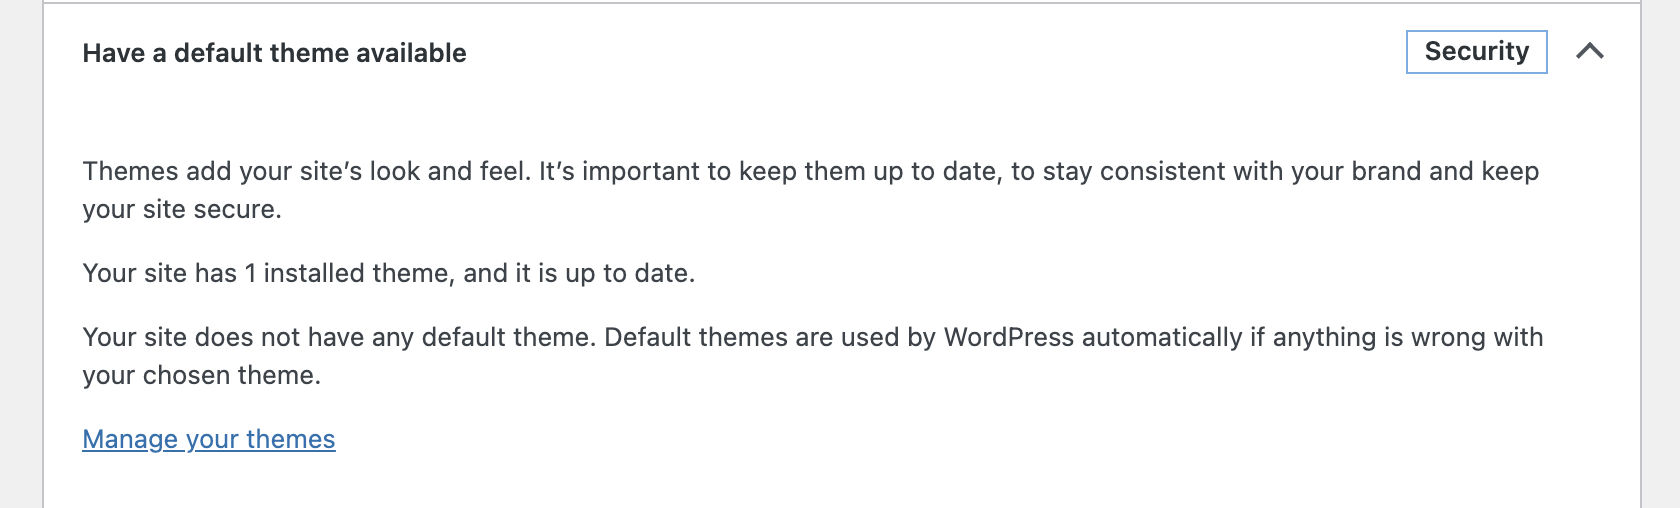 WordPress Have a Default Theme Available warning